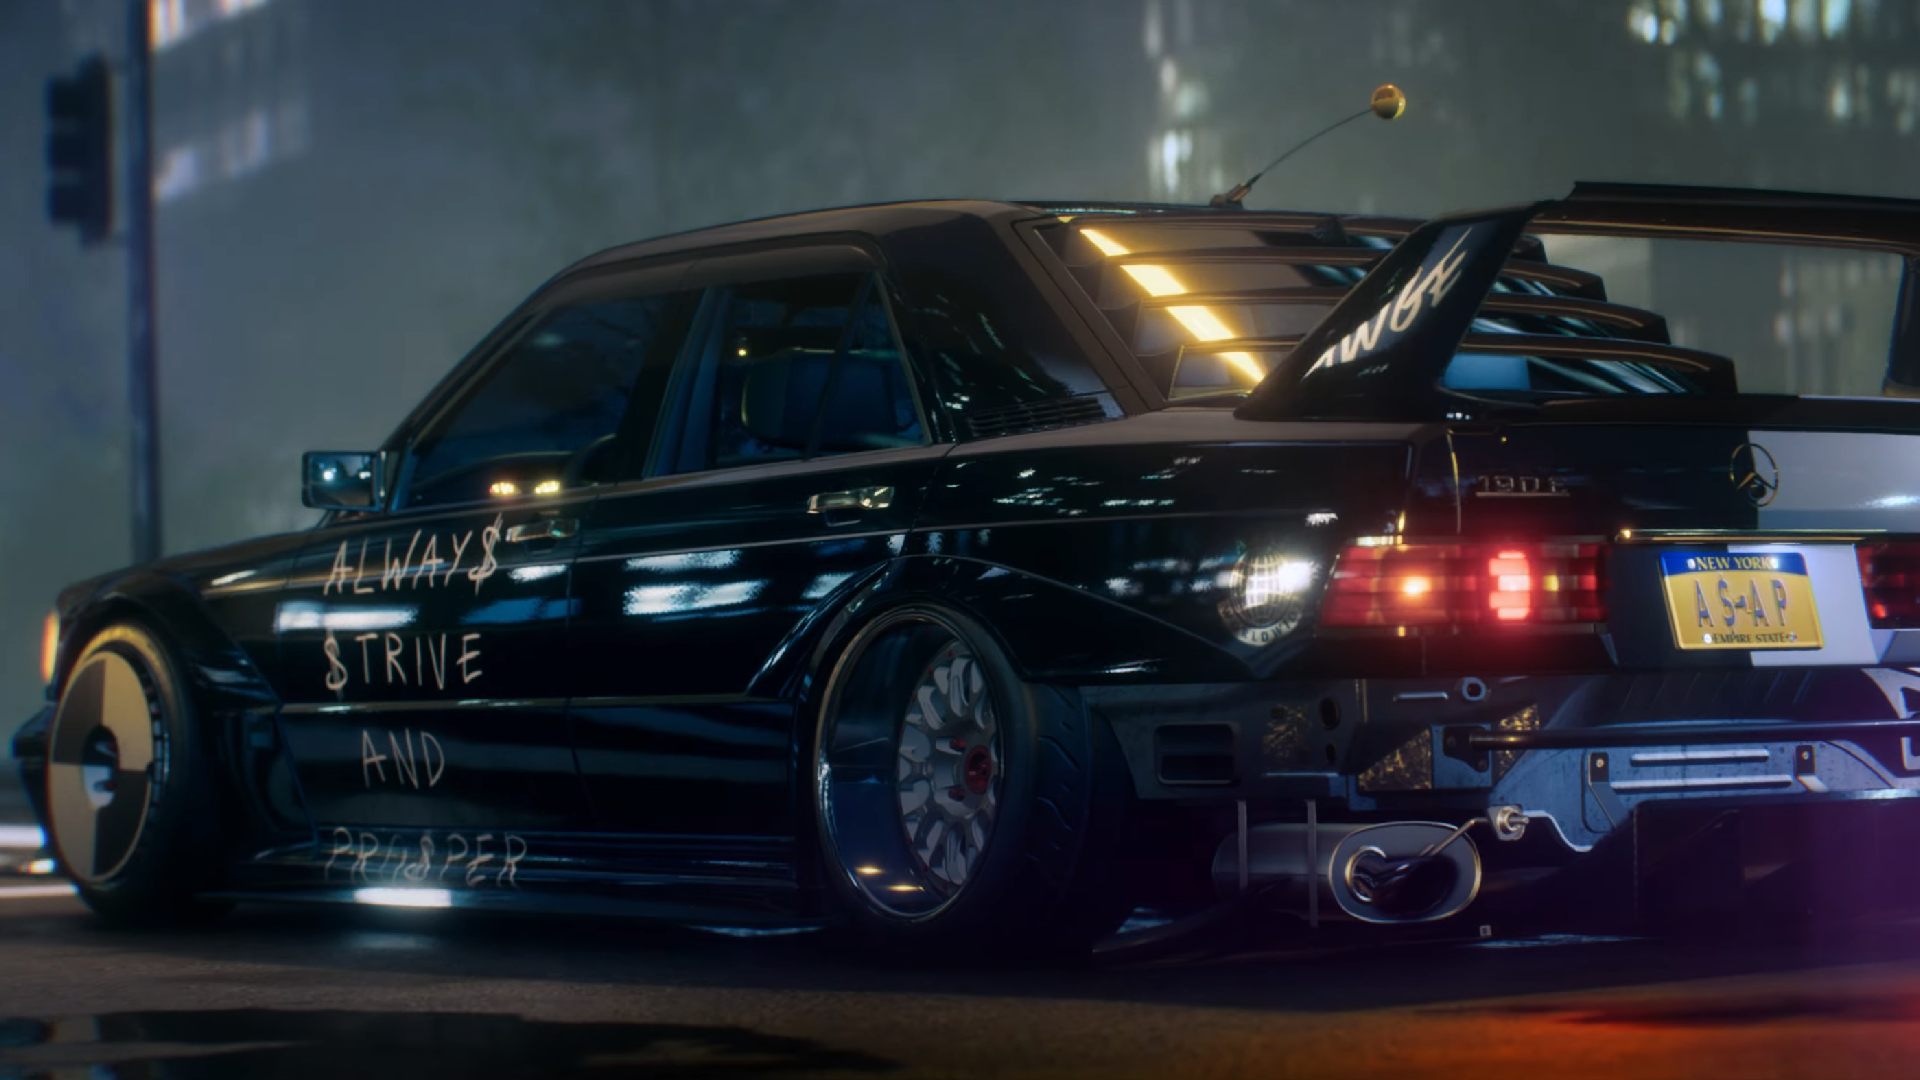 Best racing games: a black car with writing on the side in Need for Speed unbound